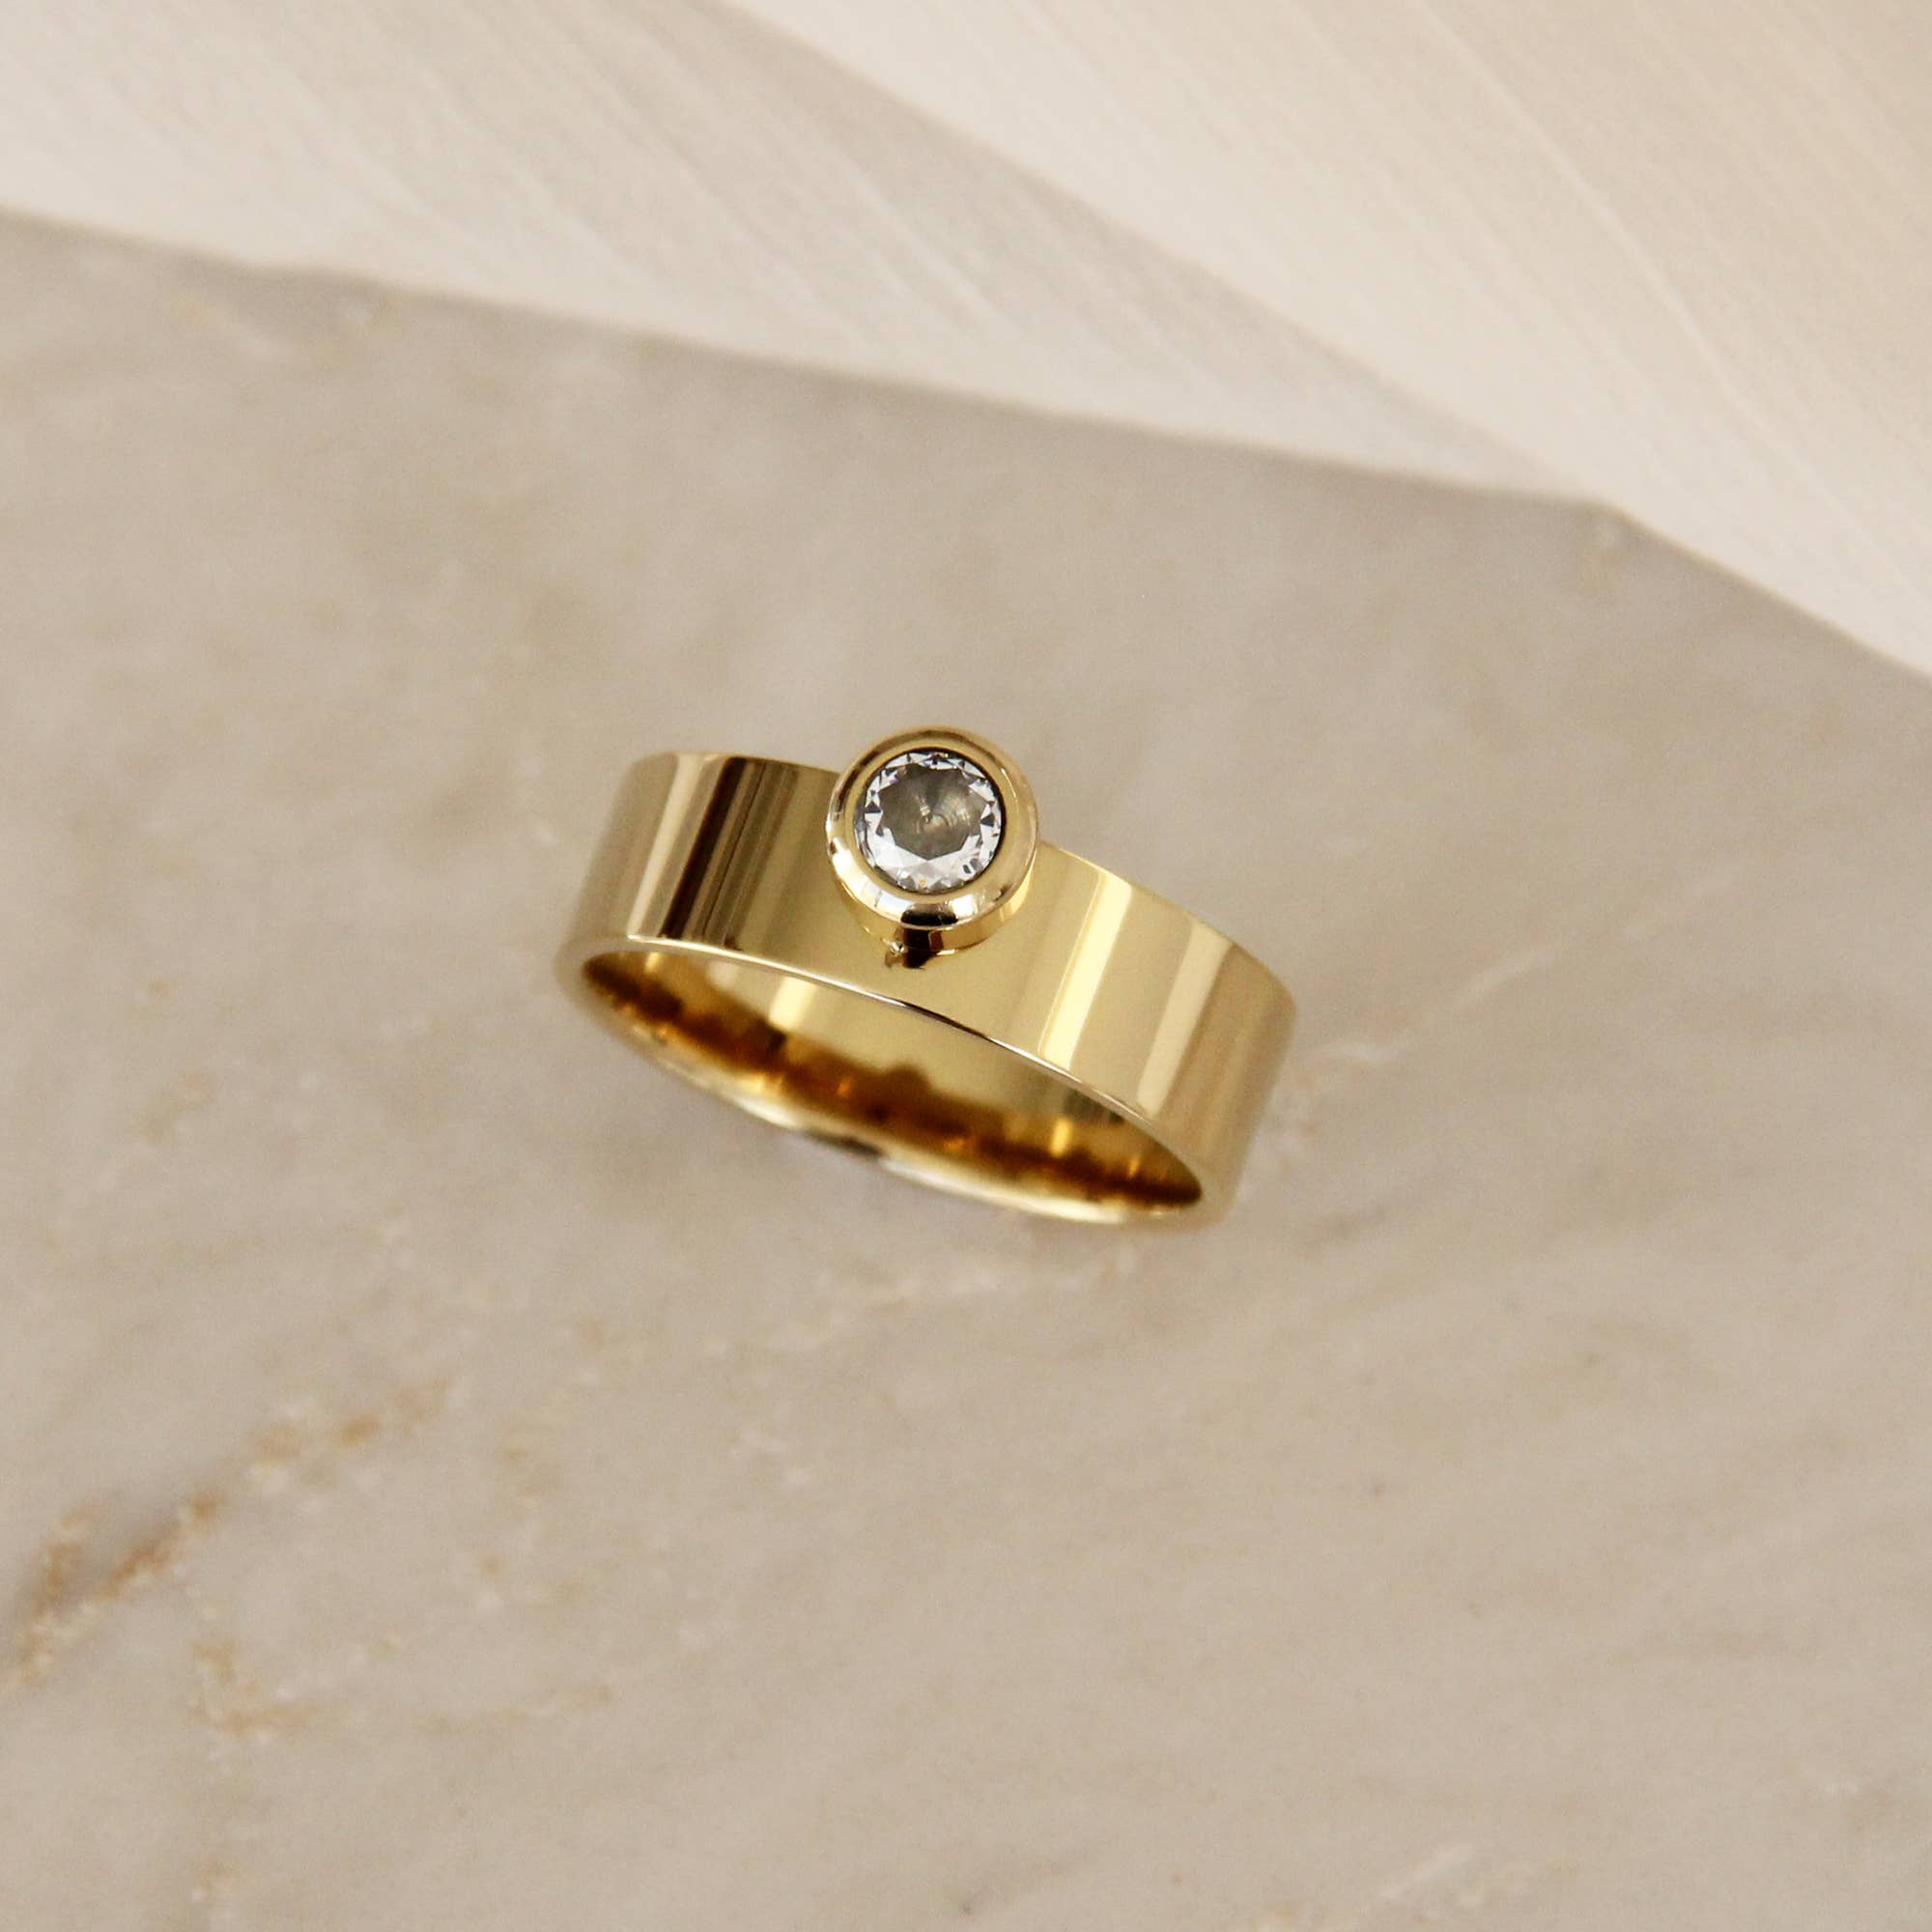 Bezel Band Ring: Gold - Round Cut Rings